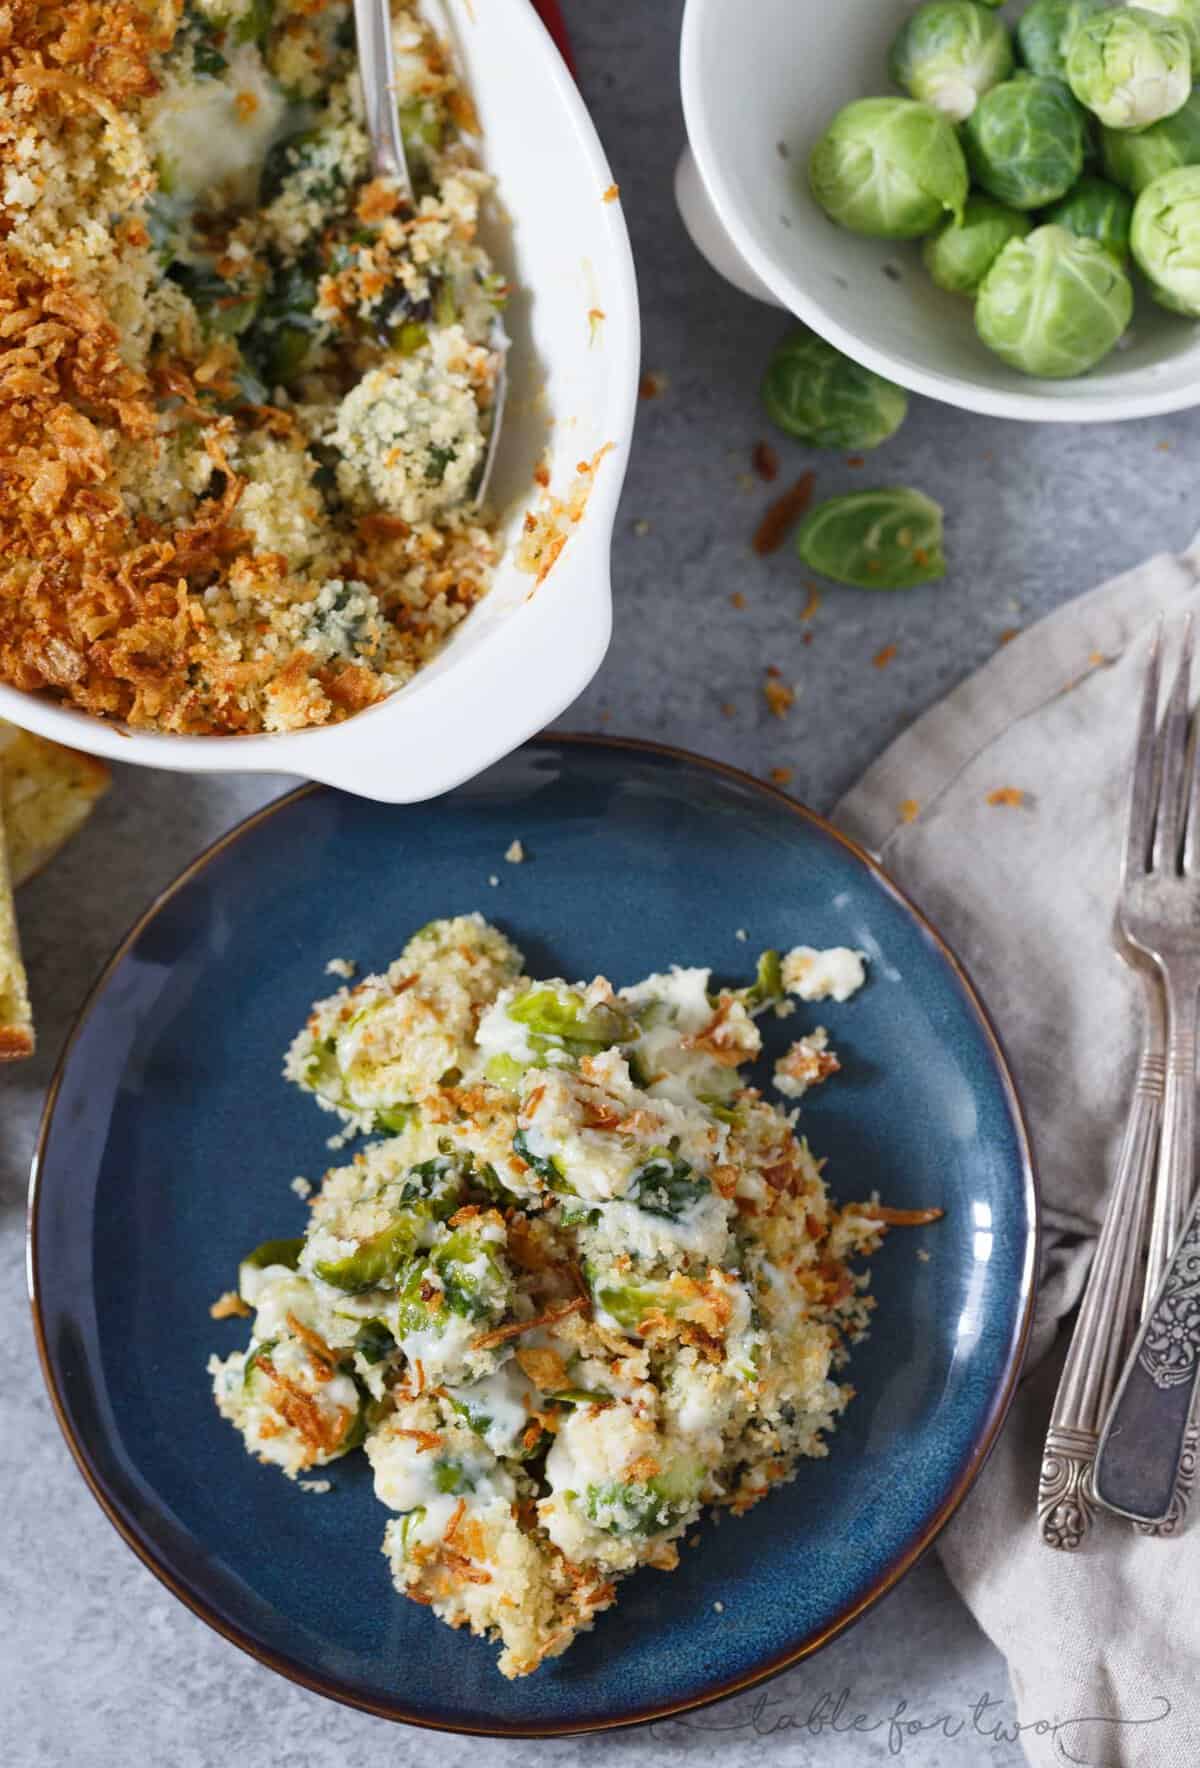 Pretty sure if you hate brussels sprouts, you haven't had them the right way. This roasted brussels sprouts gratin with garlic crumble and fried onion topping is going to elevate your side dish game at any party or potluck AND you will fall in love with brussels sprouts all over again! PROMISE!